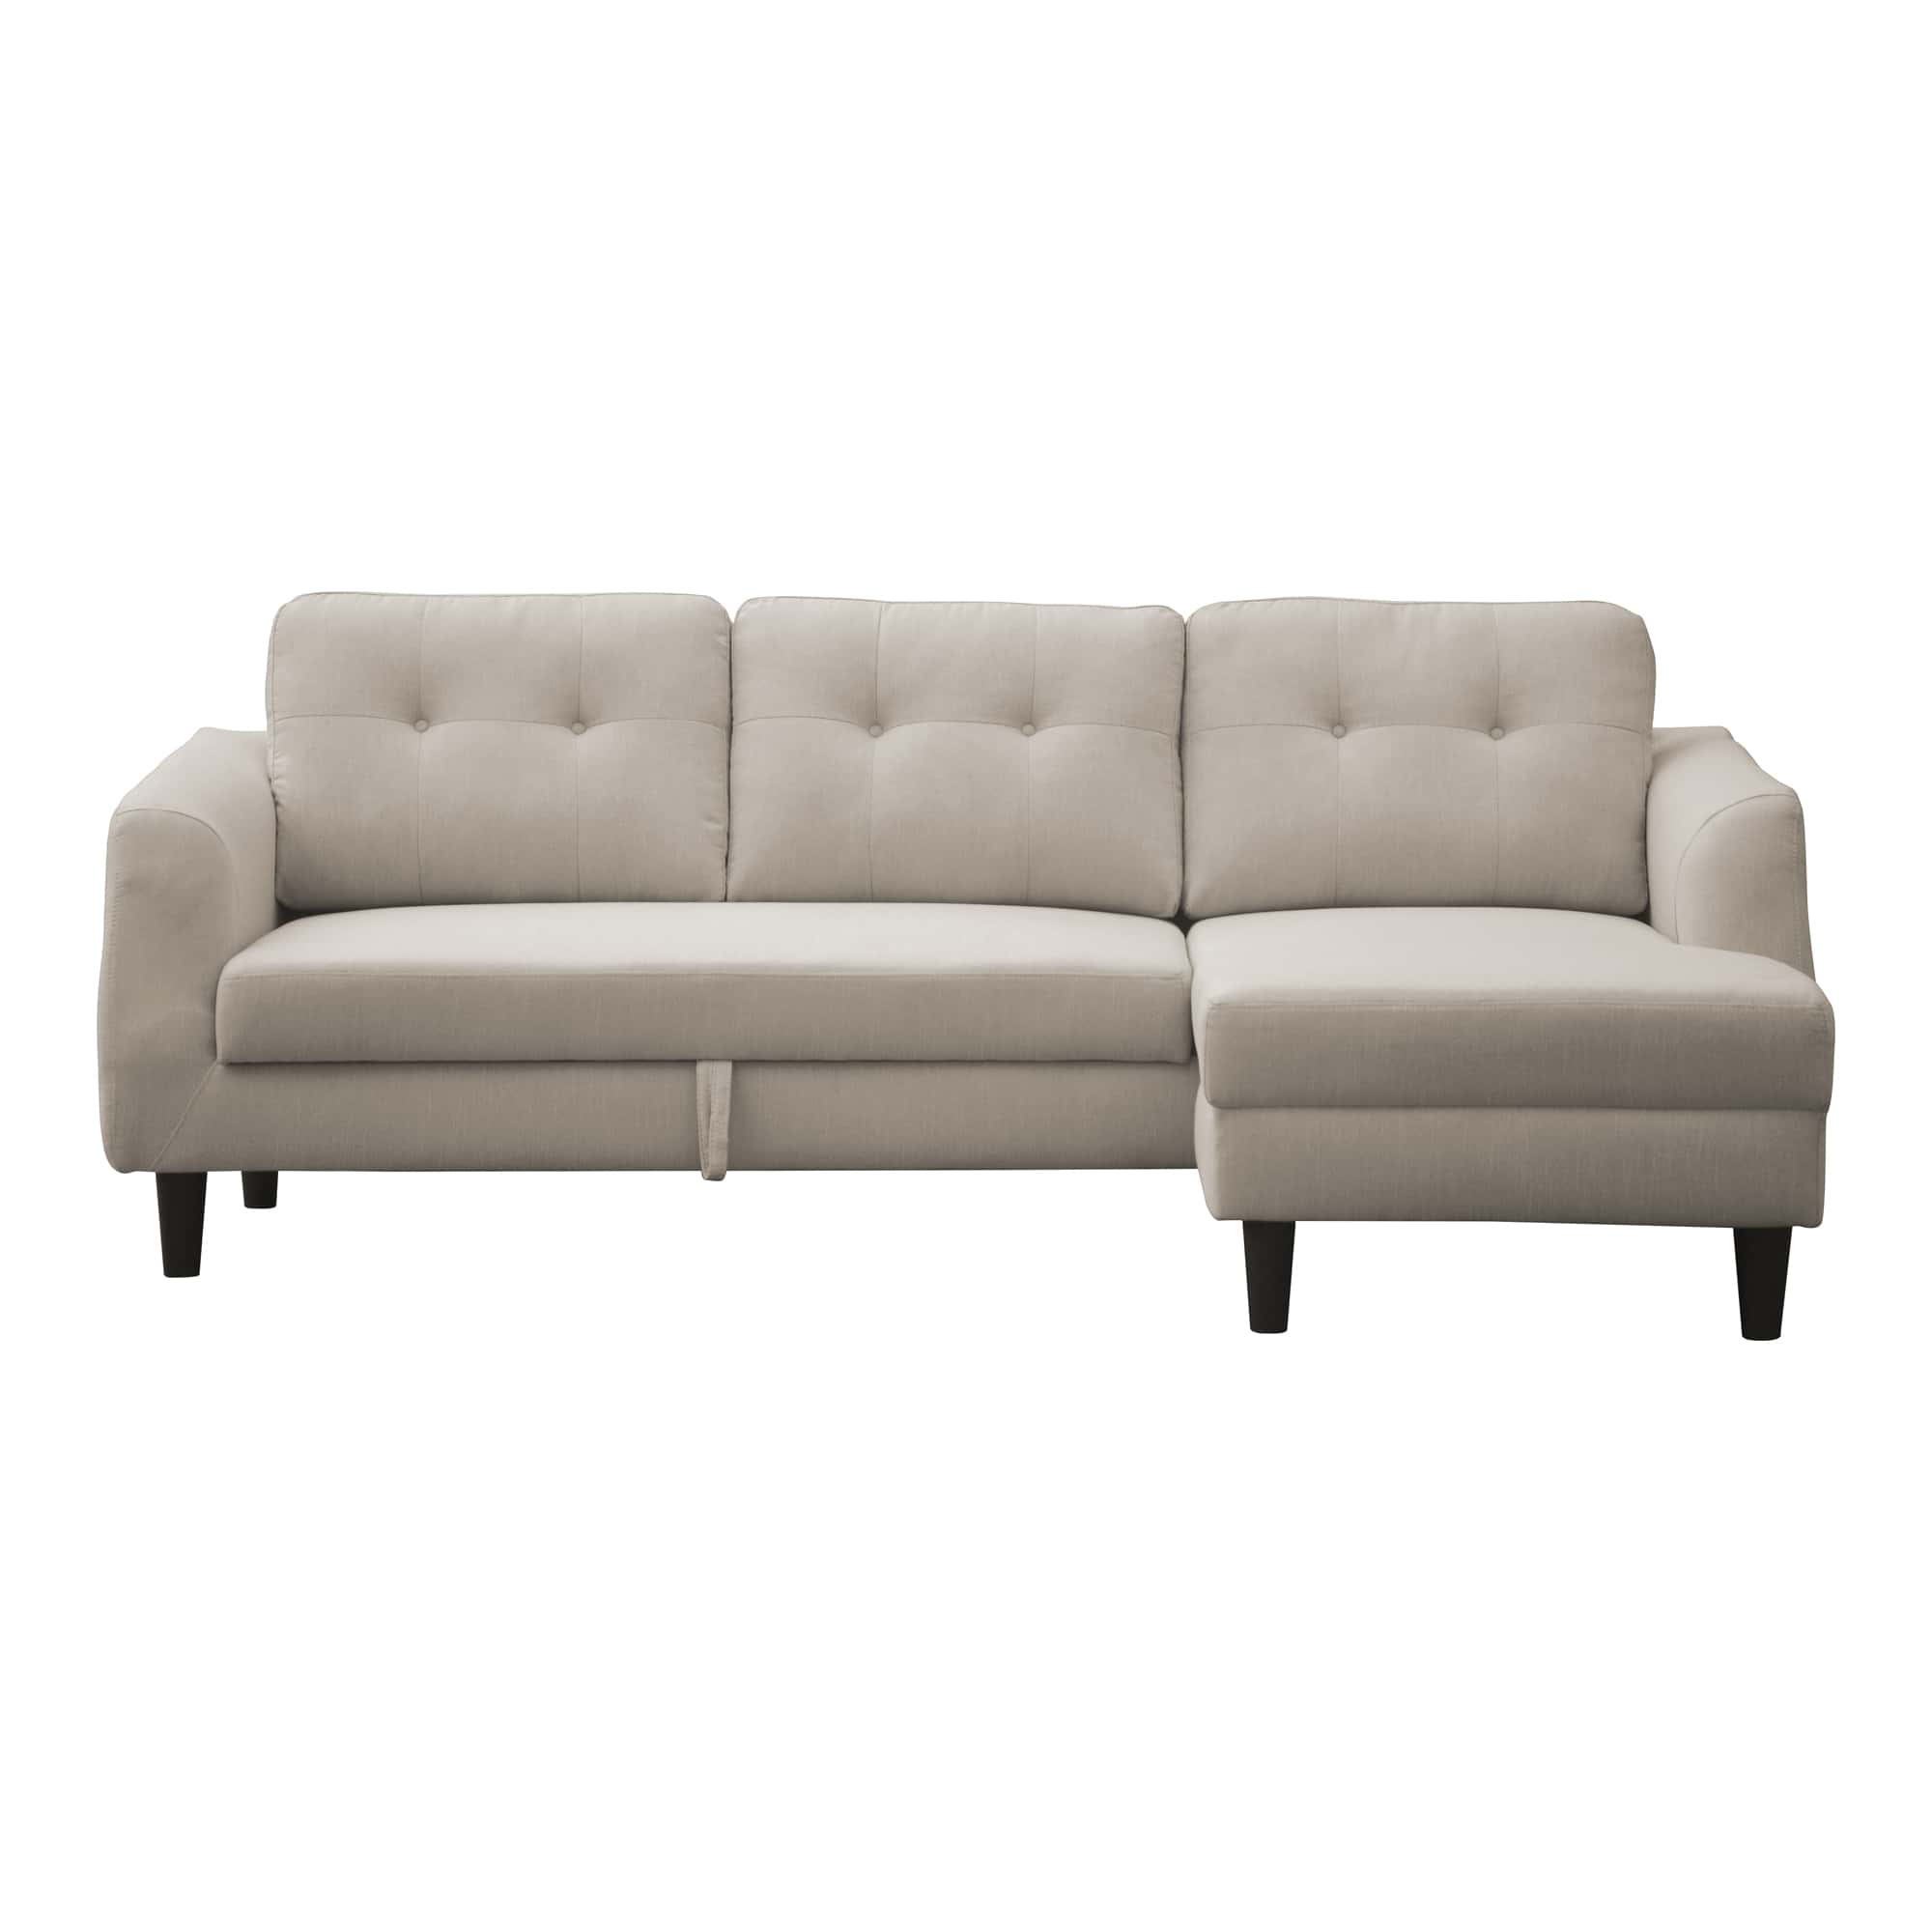 Belagio Sofa Bed With Chaise Beige Right by Moe's Home Collection